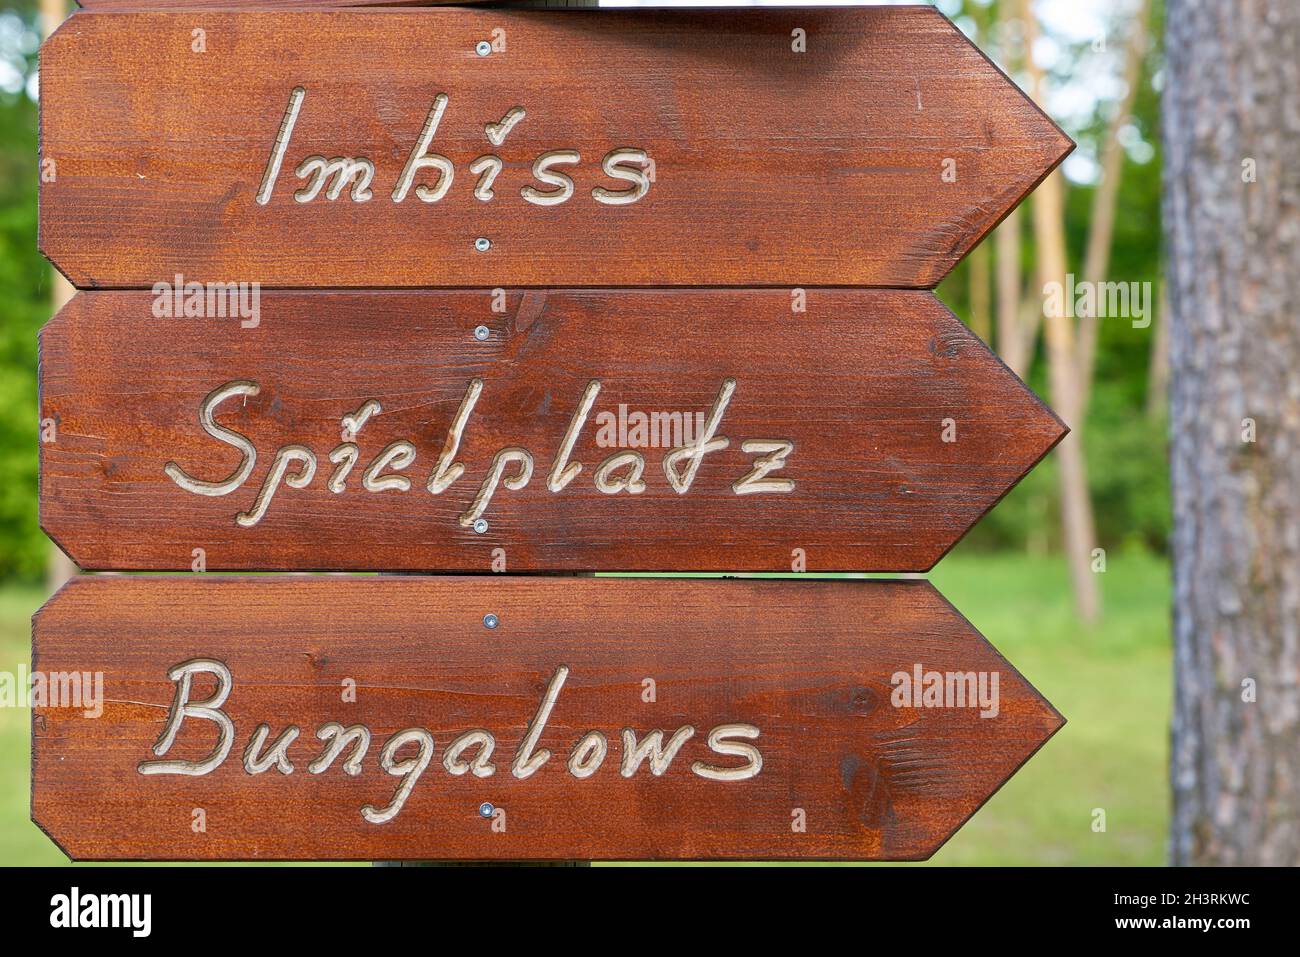 Signpost on a campsite in Germany with the inscription snack bar, playground, bungalows Stock Photo